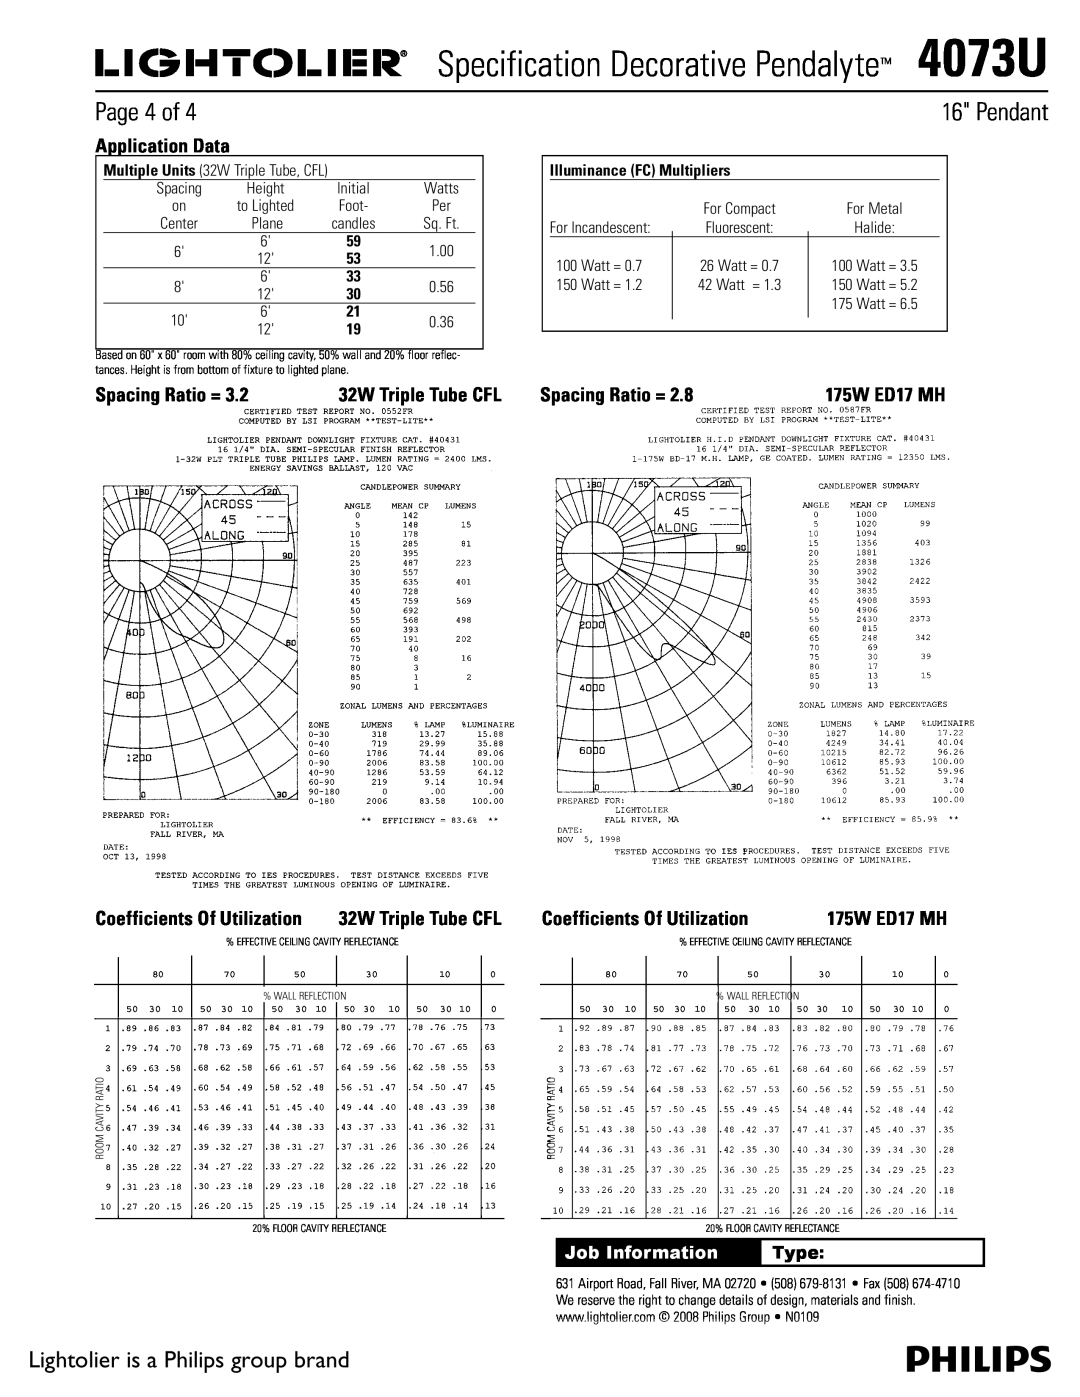 Lightolier Page 4 of, 175W ED17 MH, Coefficients Of Utilization, Specification Decorative Pendalyte4073U, Pendant 